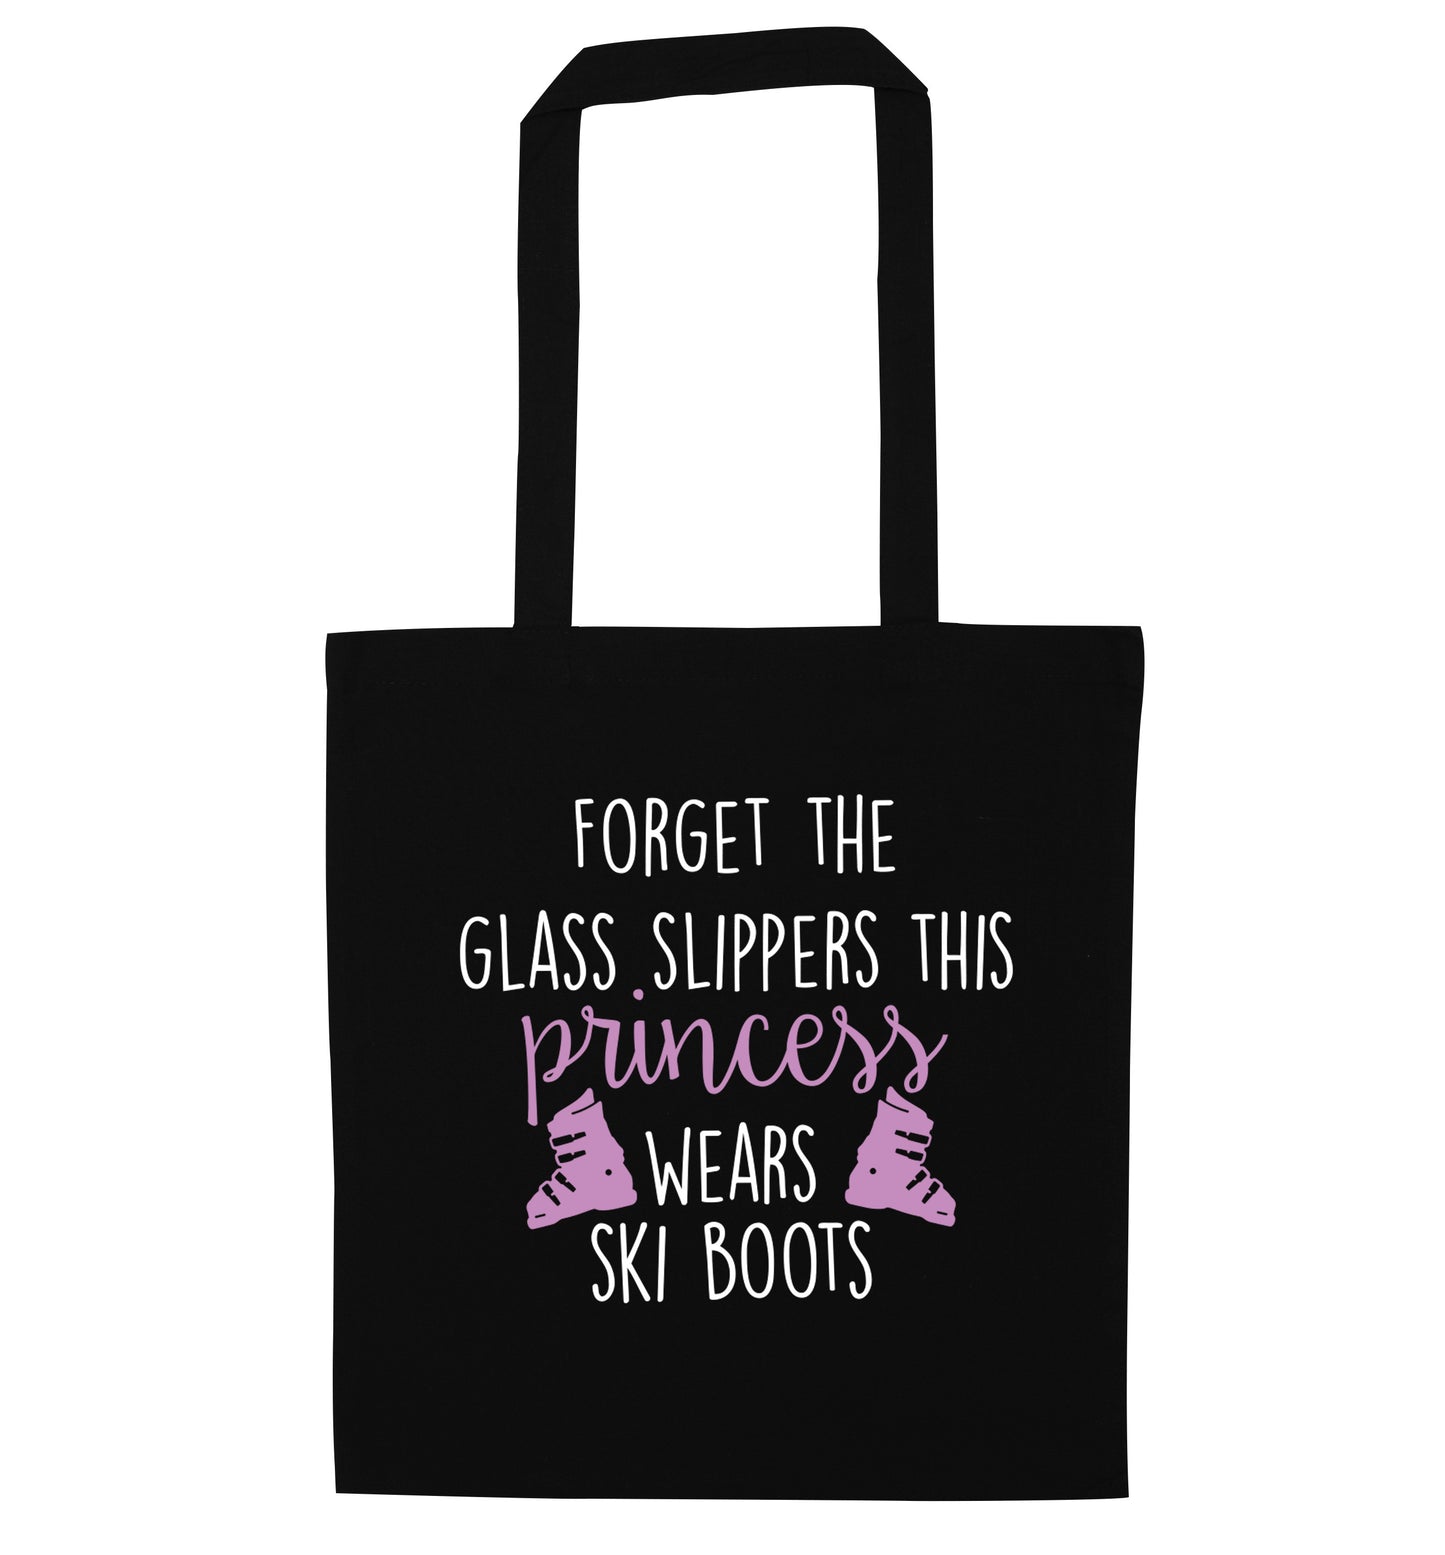 Forget the glass slippers this princess wears ski boots black tote bag